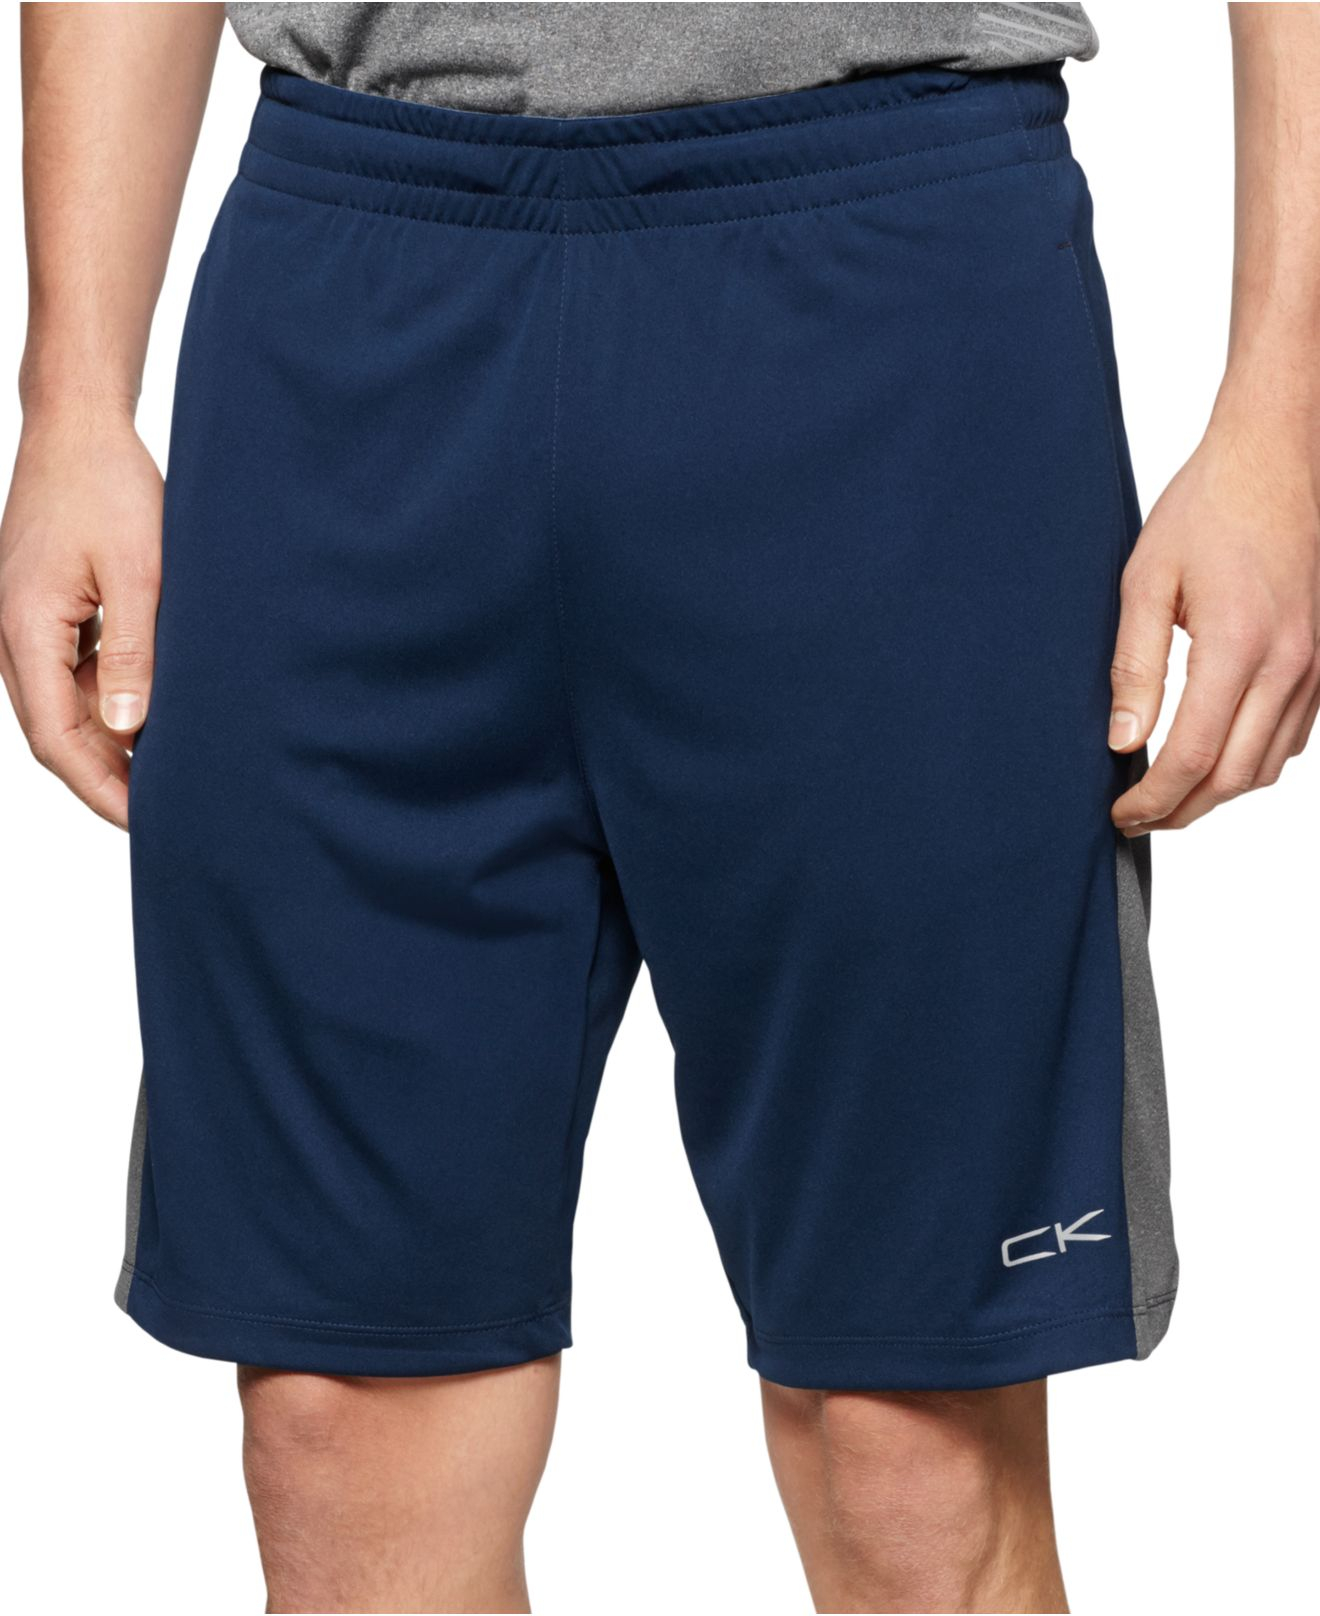 Lyst - Calvin Klein Performance Colorblocked Gym Shorts in Blue for Men